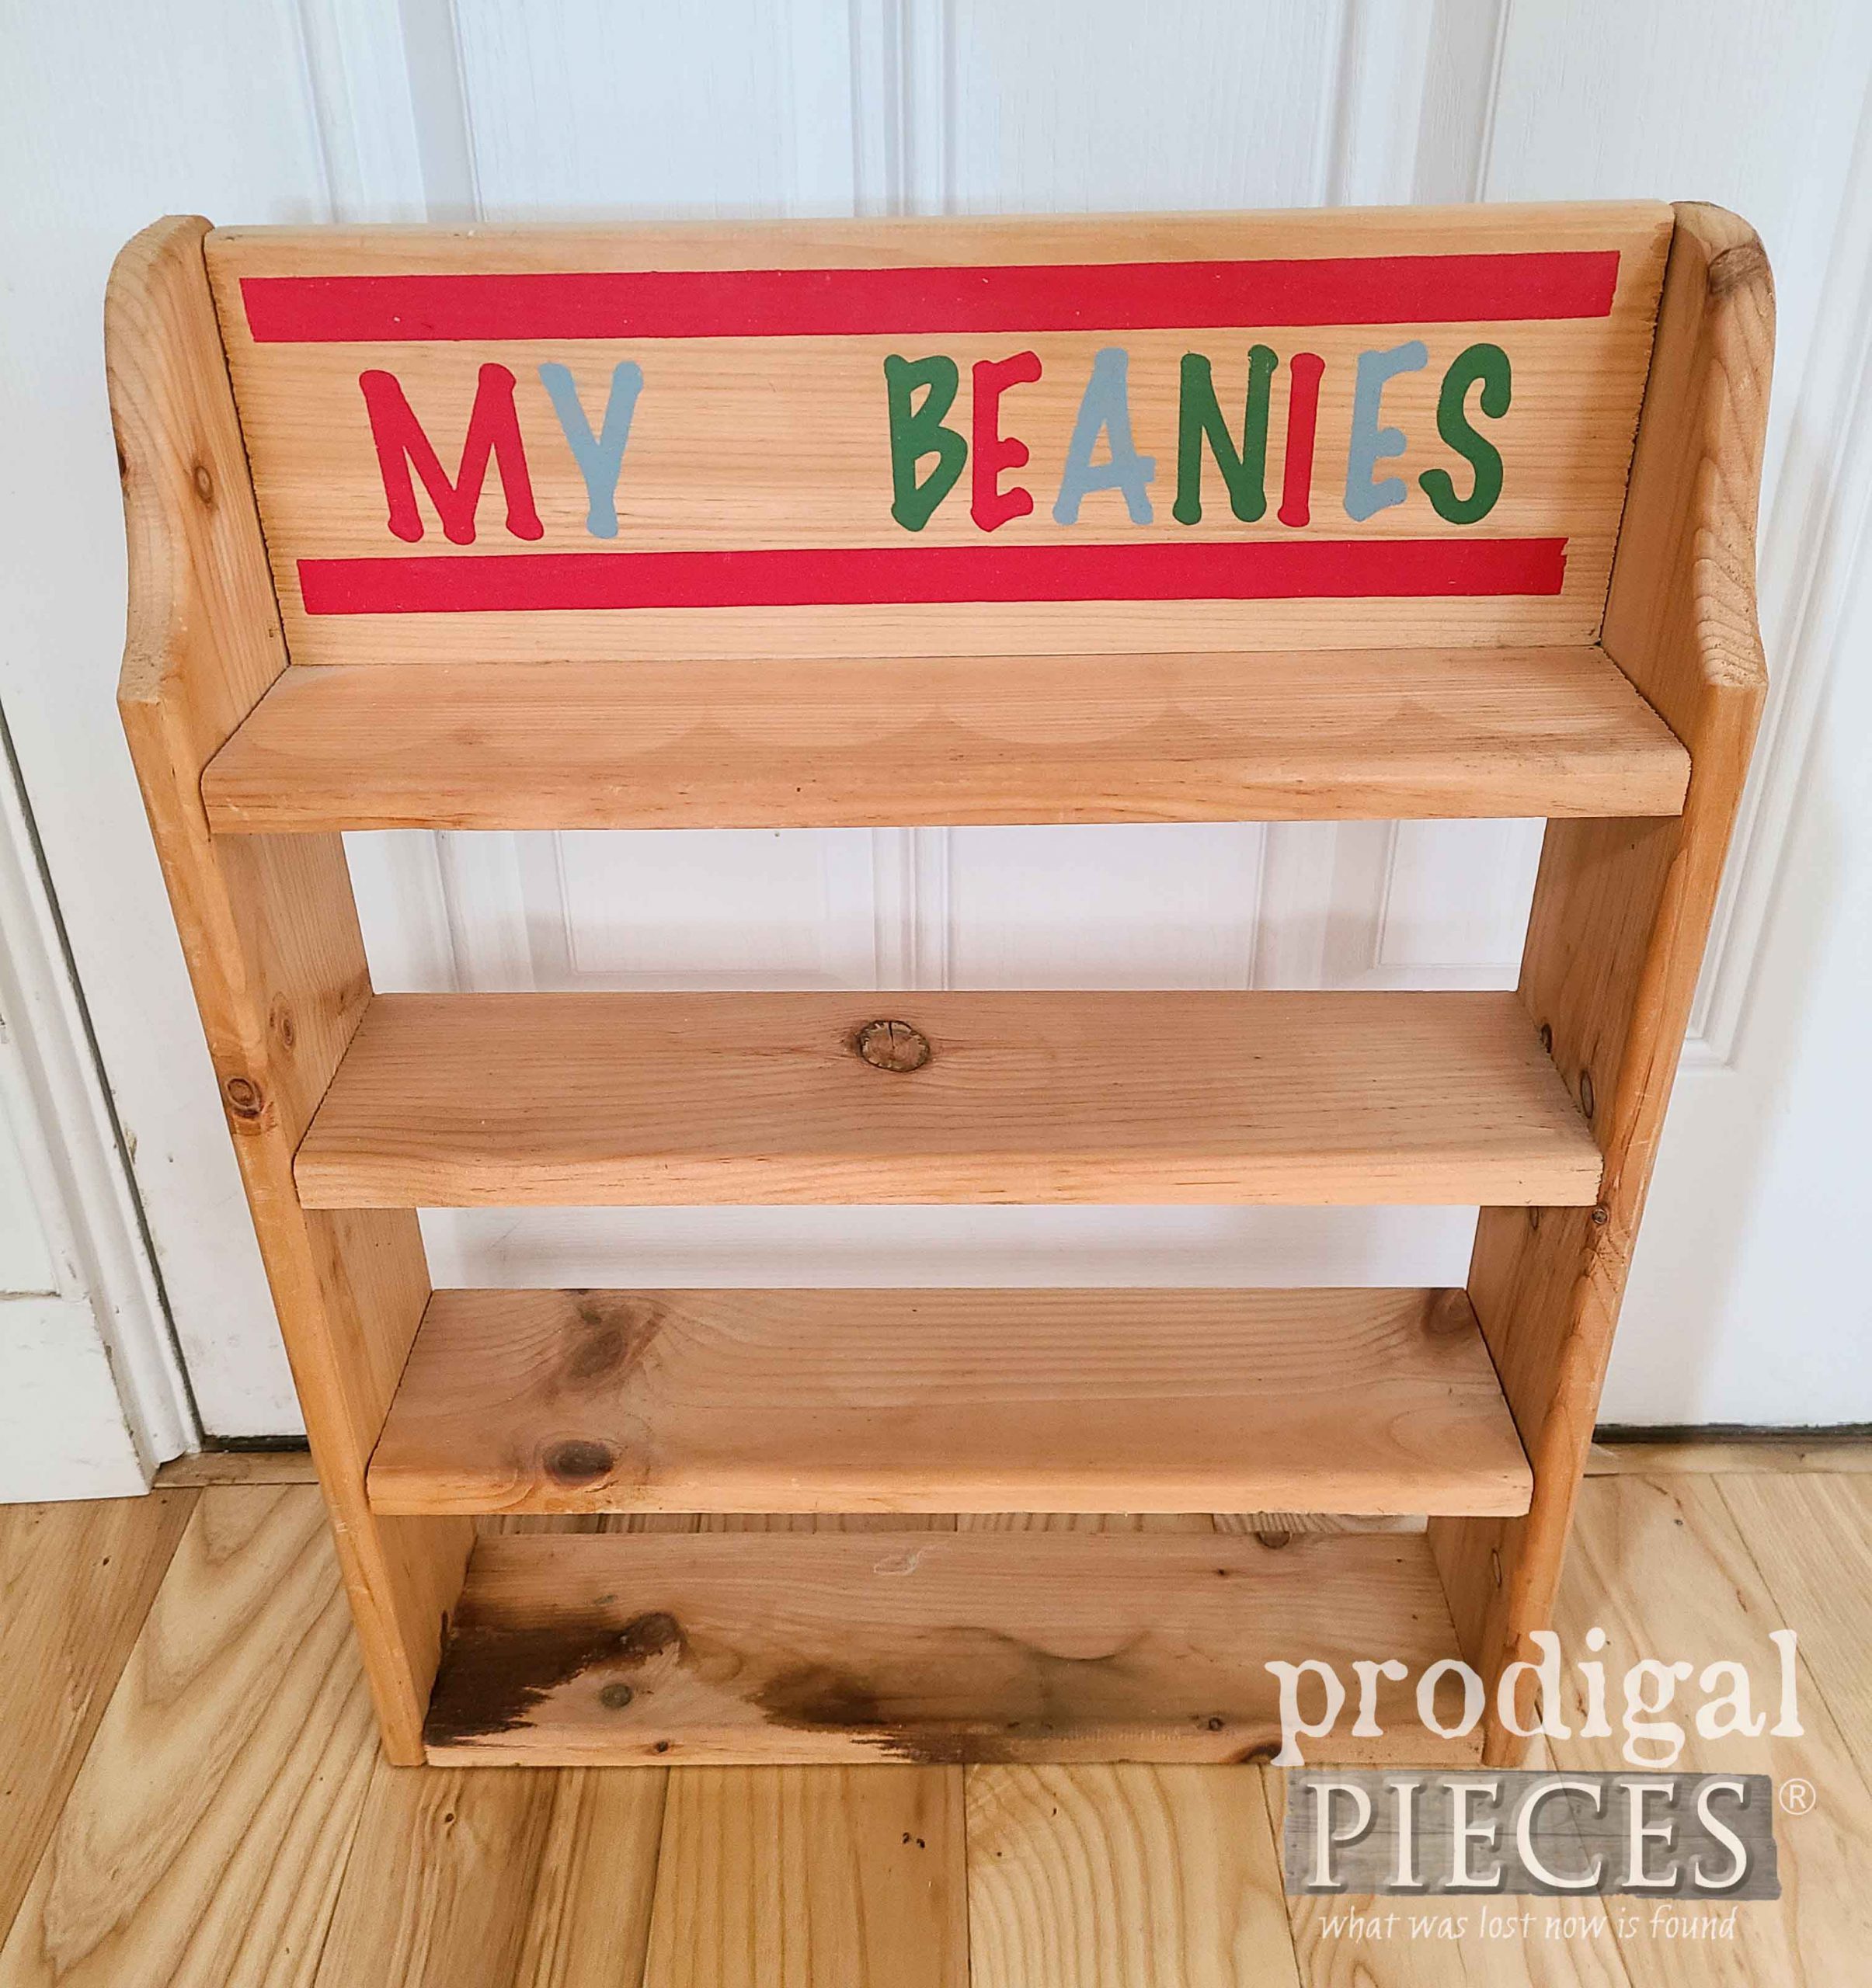 Beanie Baby Shelf Before Upcycle by Prodigal Pieces | prodigalpieces.com